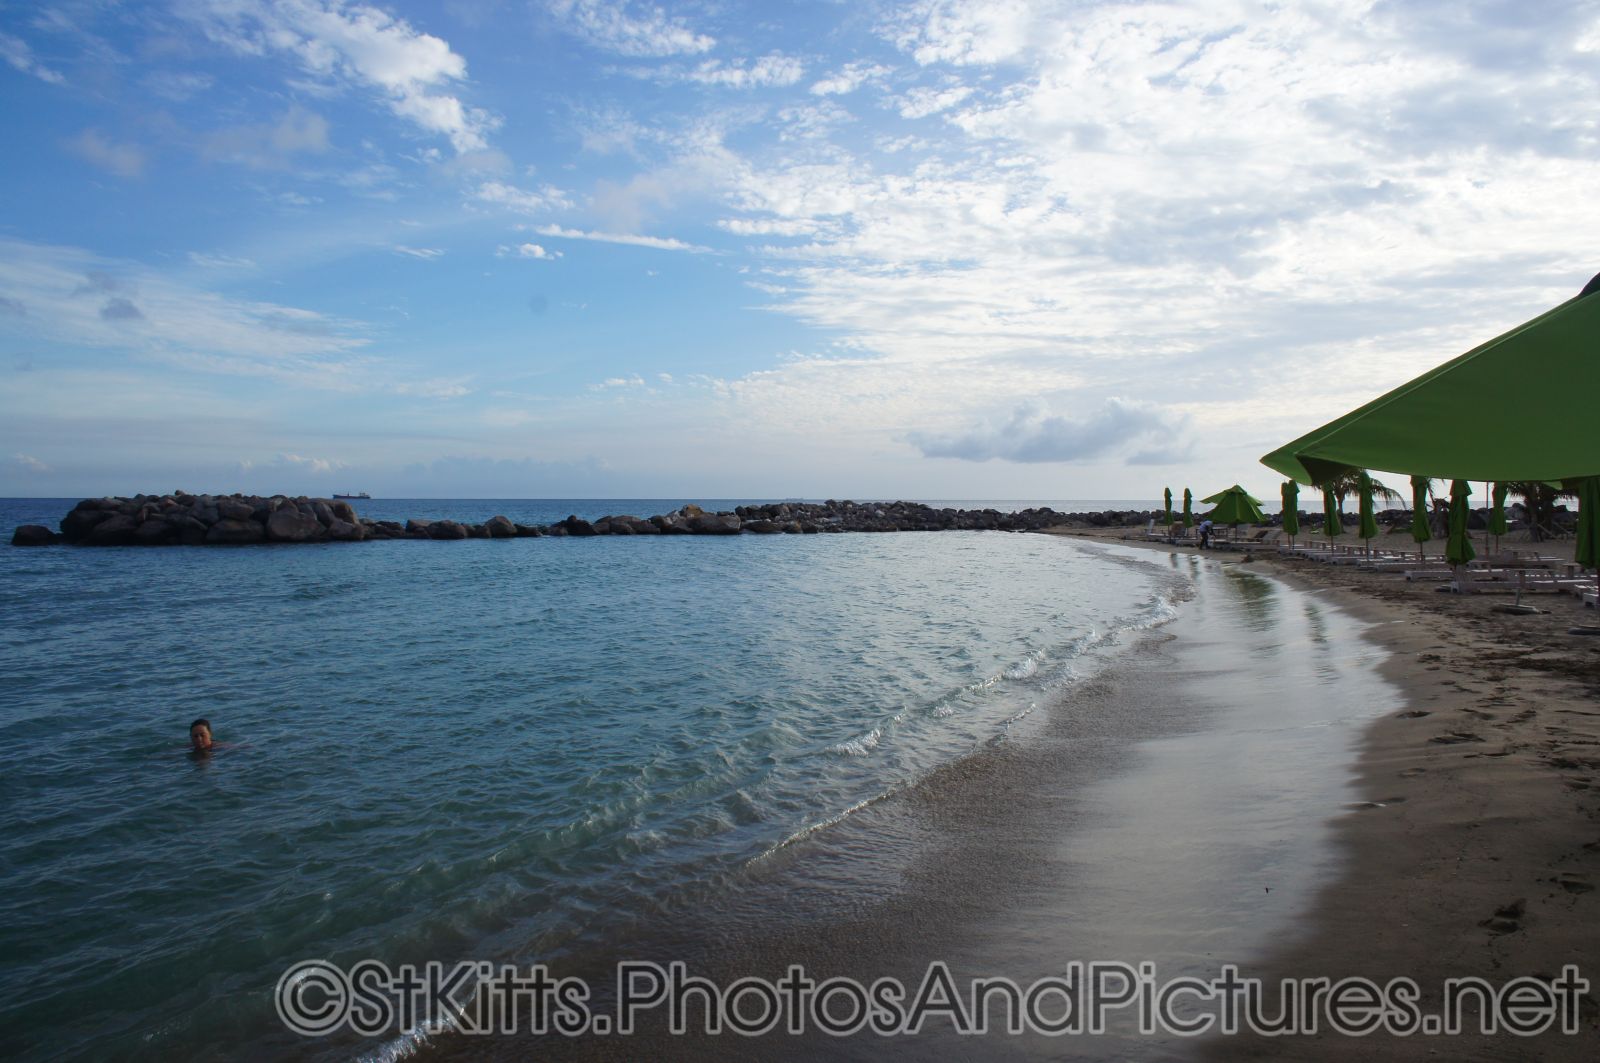 Water meets sand at beach behind Carambola Restaurant in St Kitts.jpg
